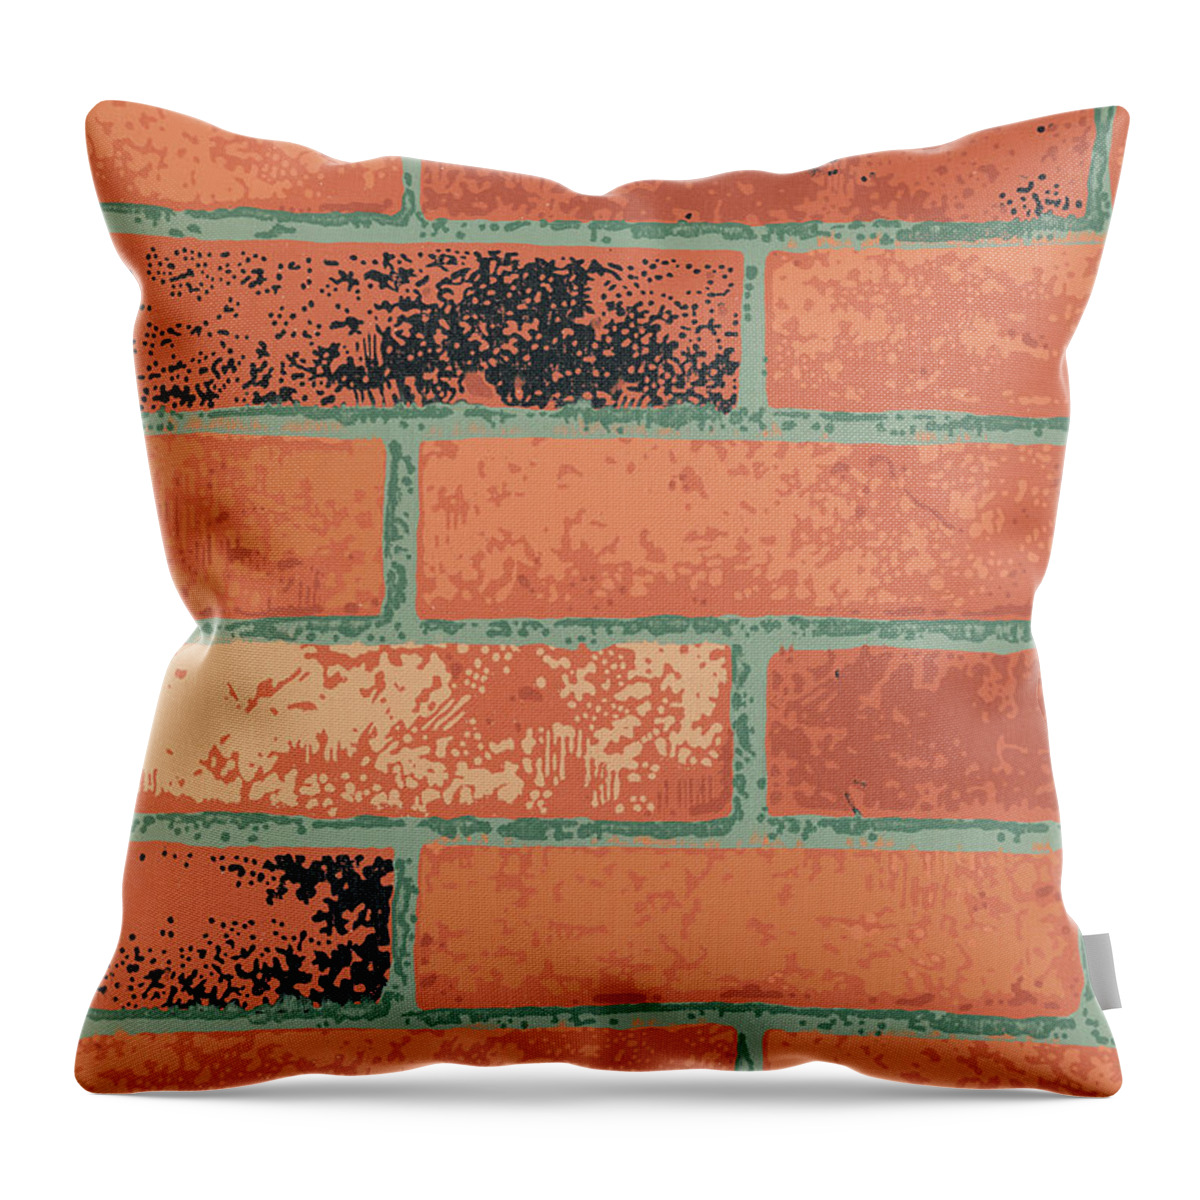 Background Throw Pillow featuring the drawing Bricks by CSA Images